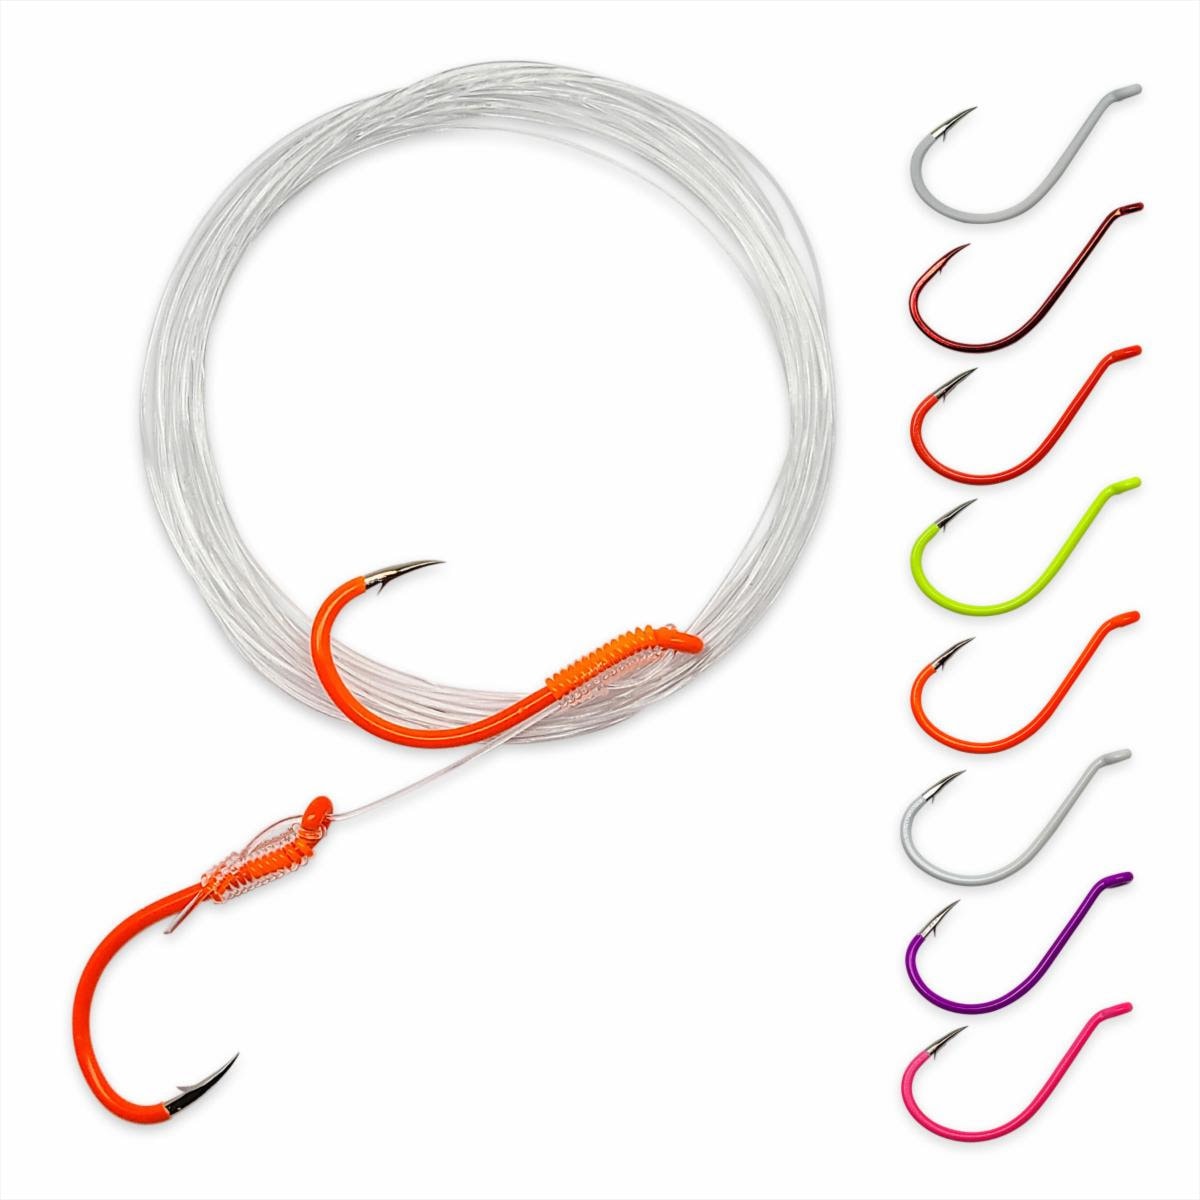 Gamakatsu® Pre-Tied Rigs and Snells Make Rigging A Cinch